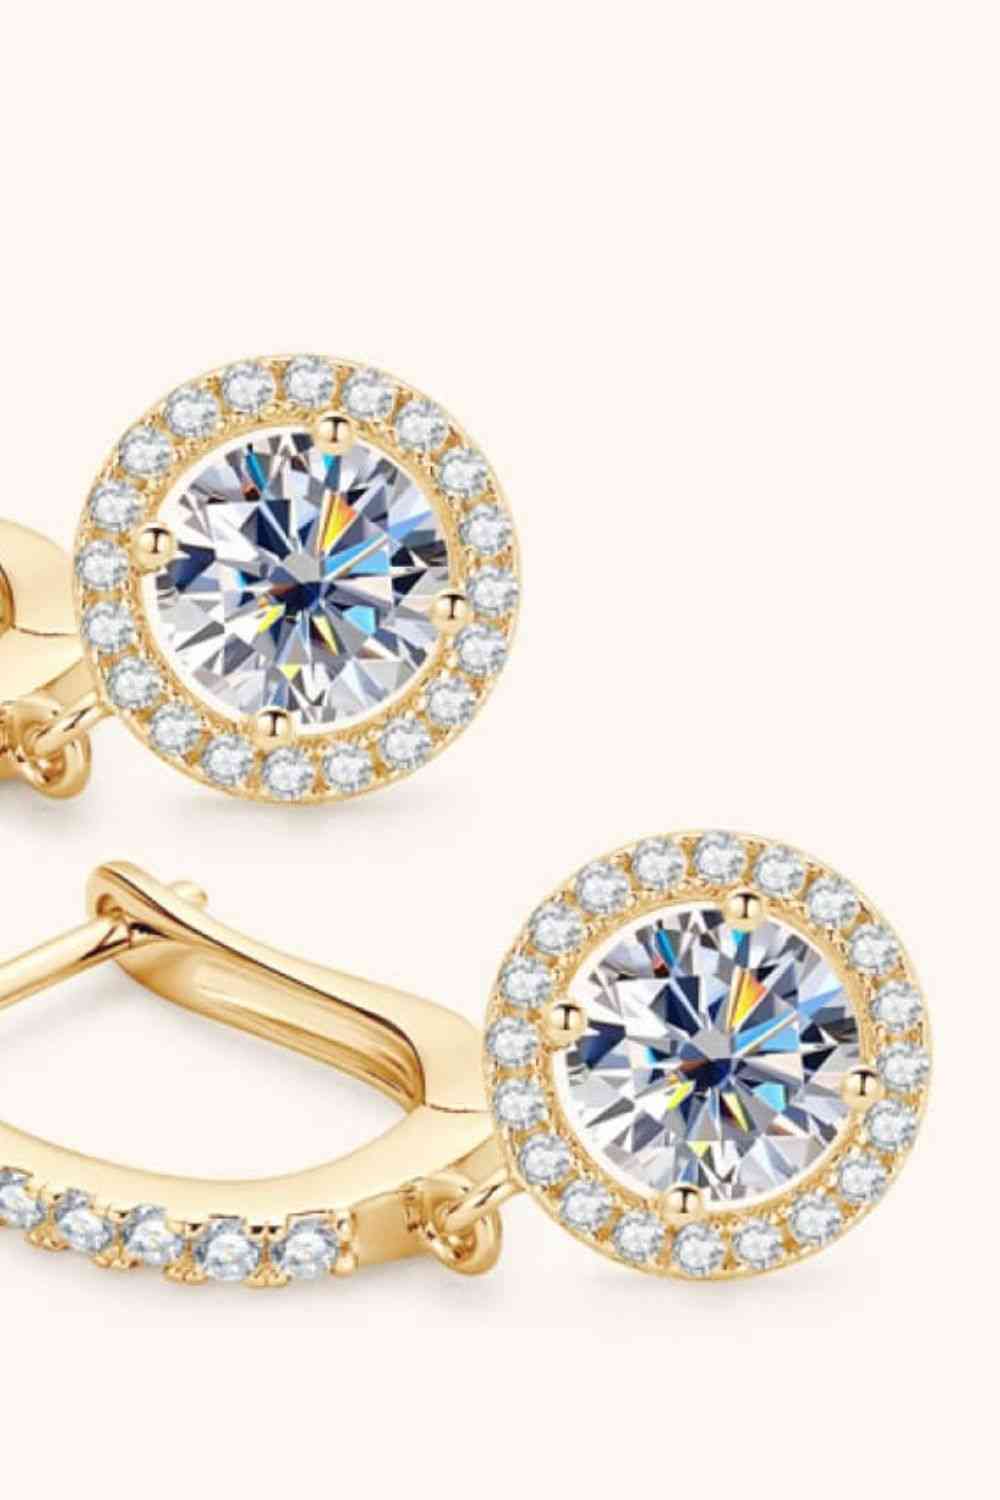 a pair of yellow gold earrings with a white diamond